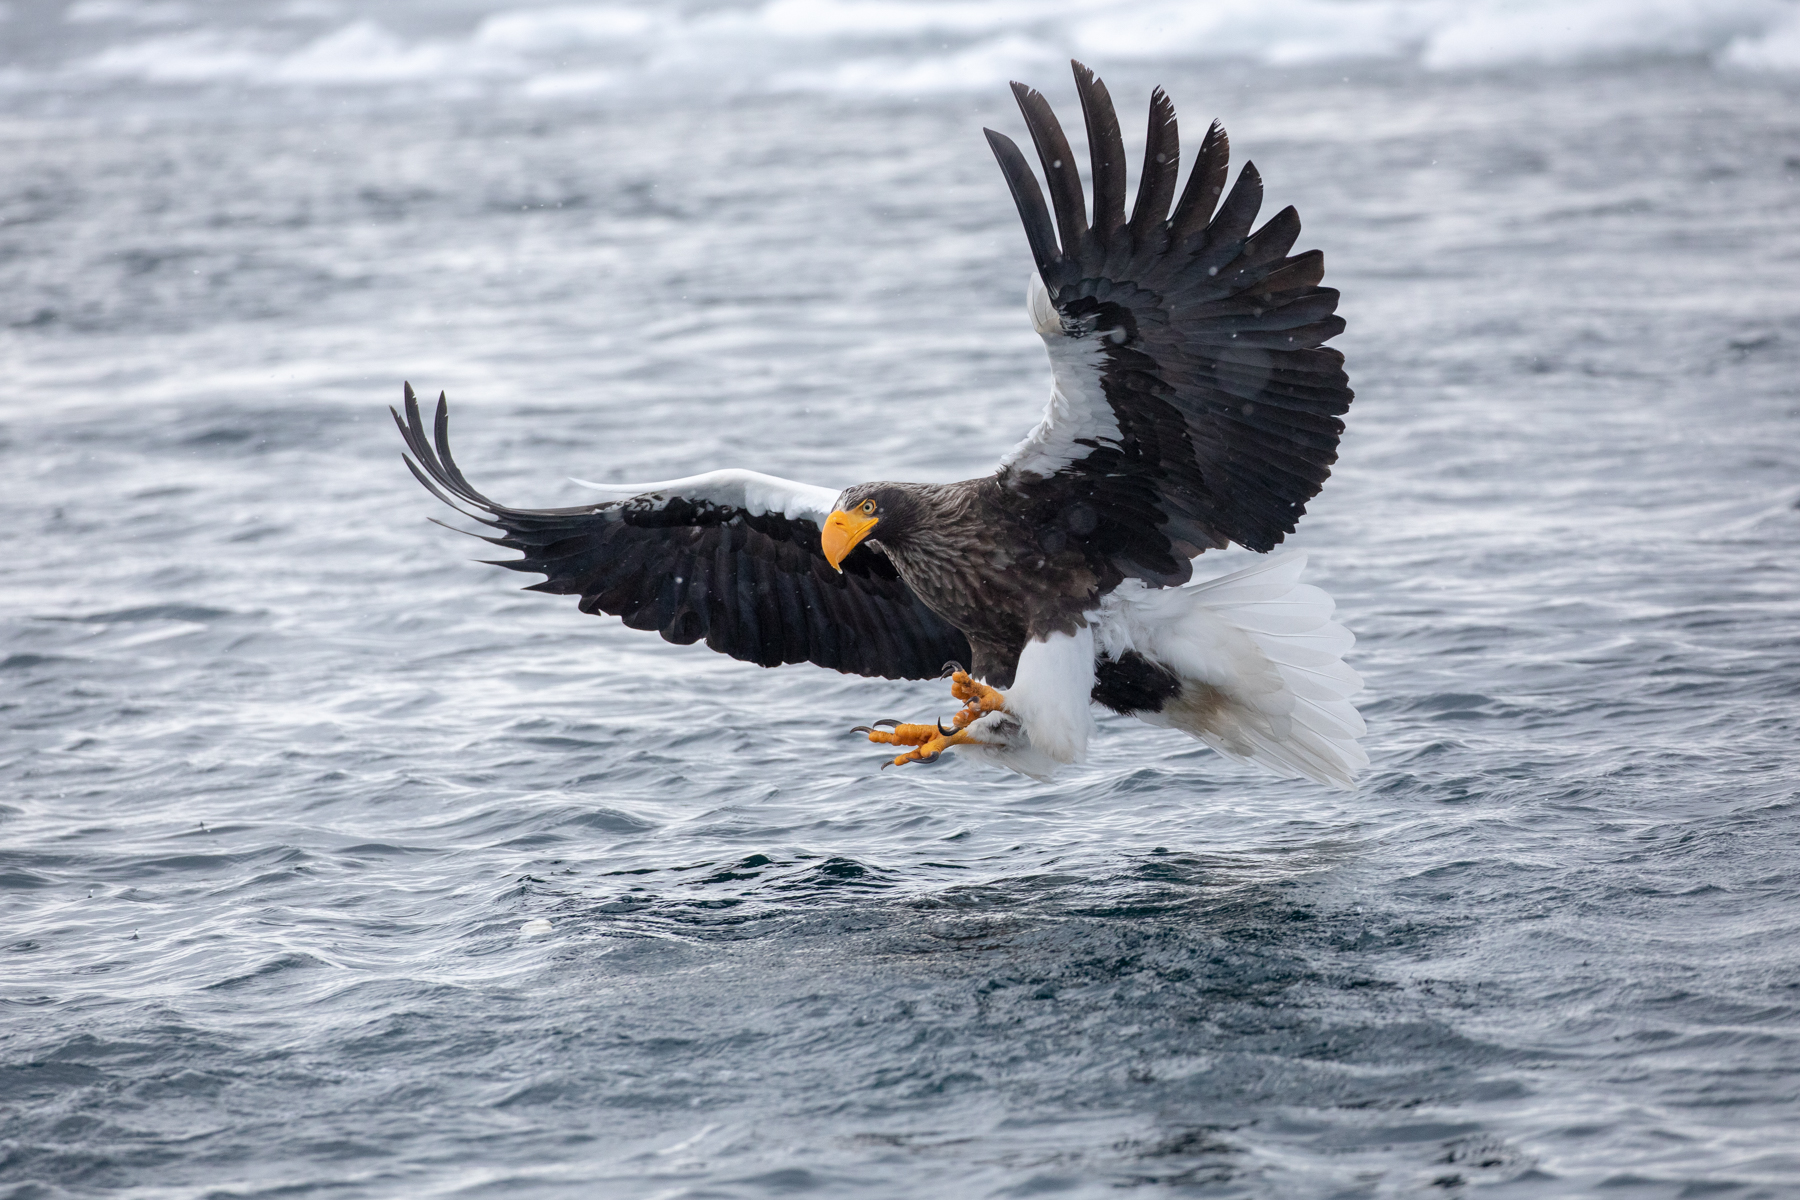 A Steller's Sea Eagle 'brakes' at the last moment as it dives for food (image by Mark Beaman)